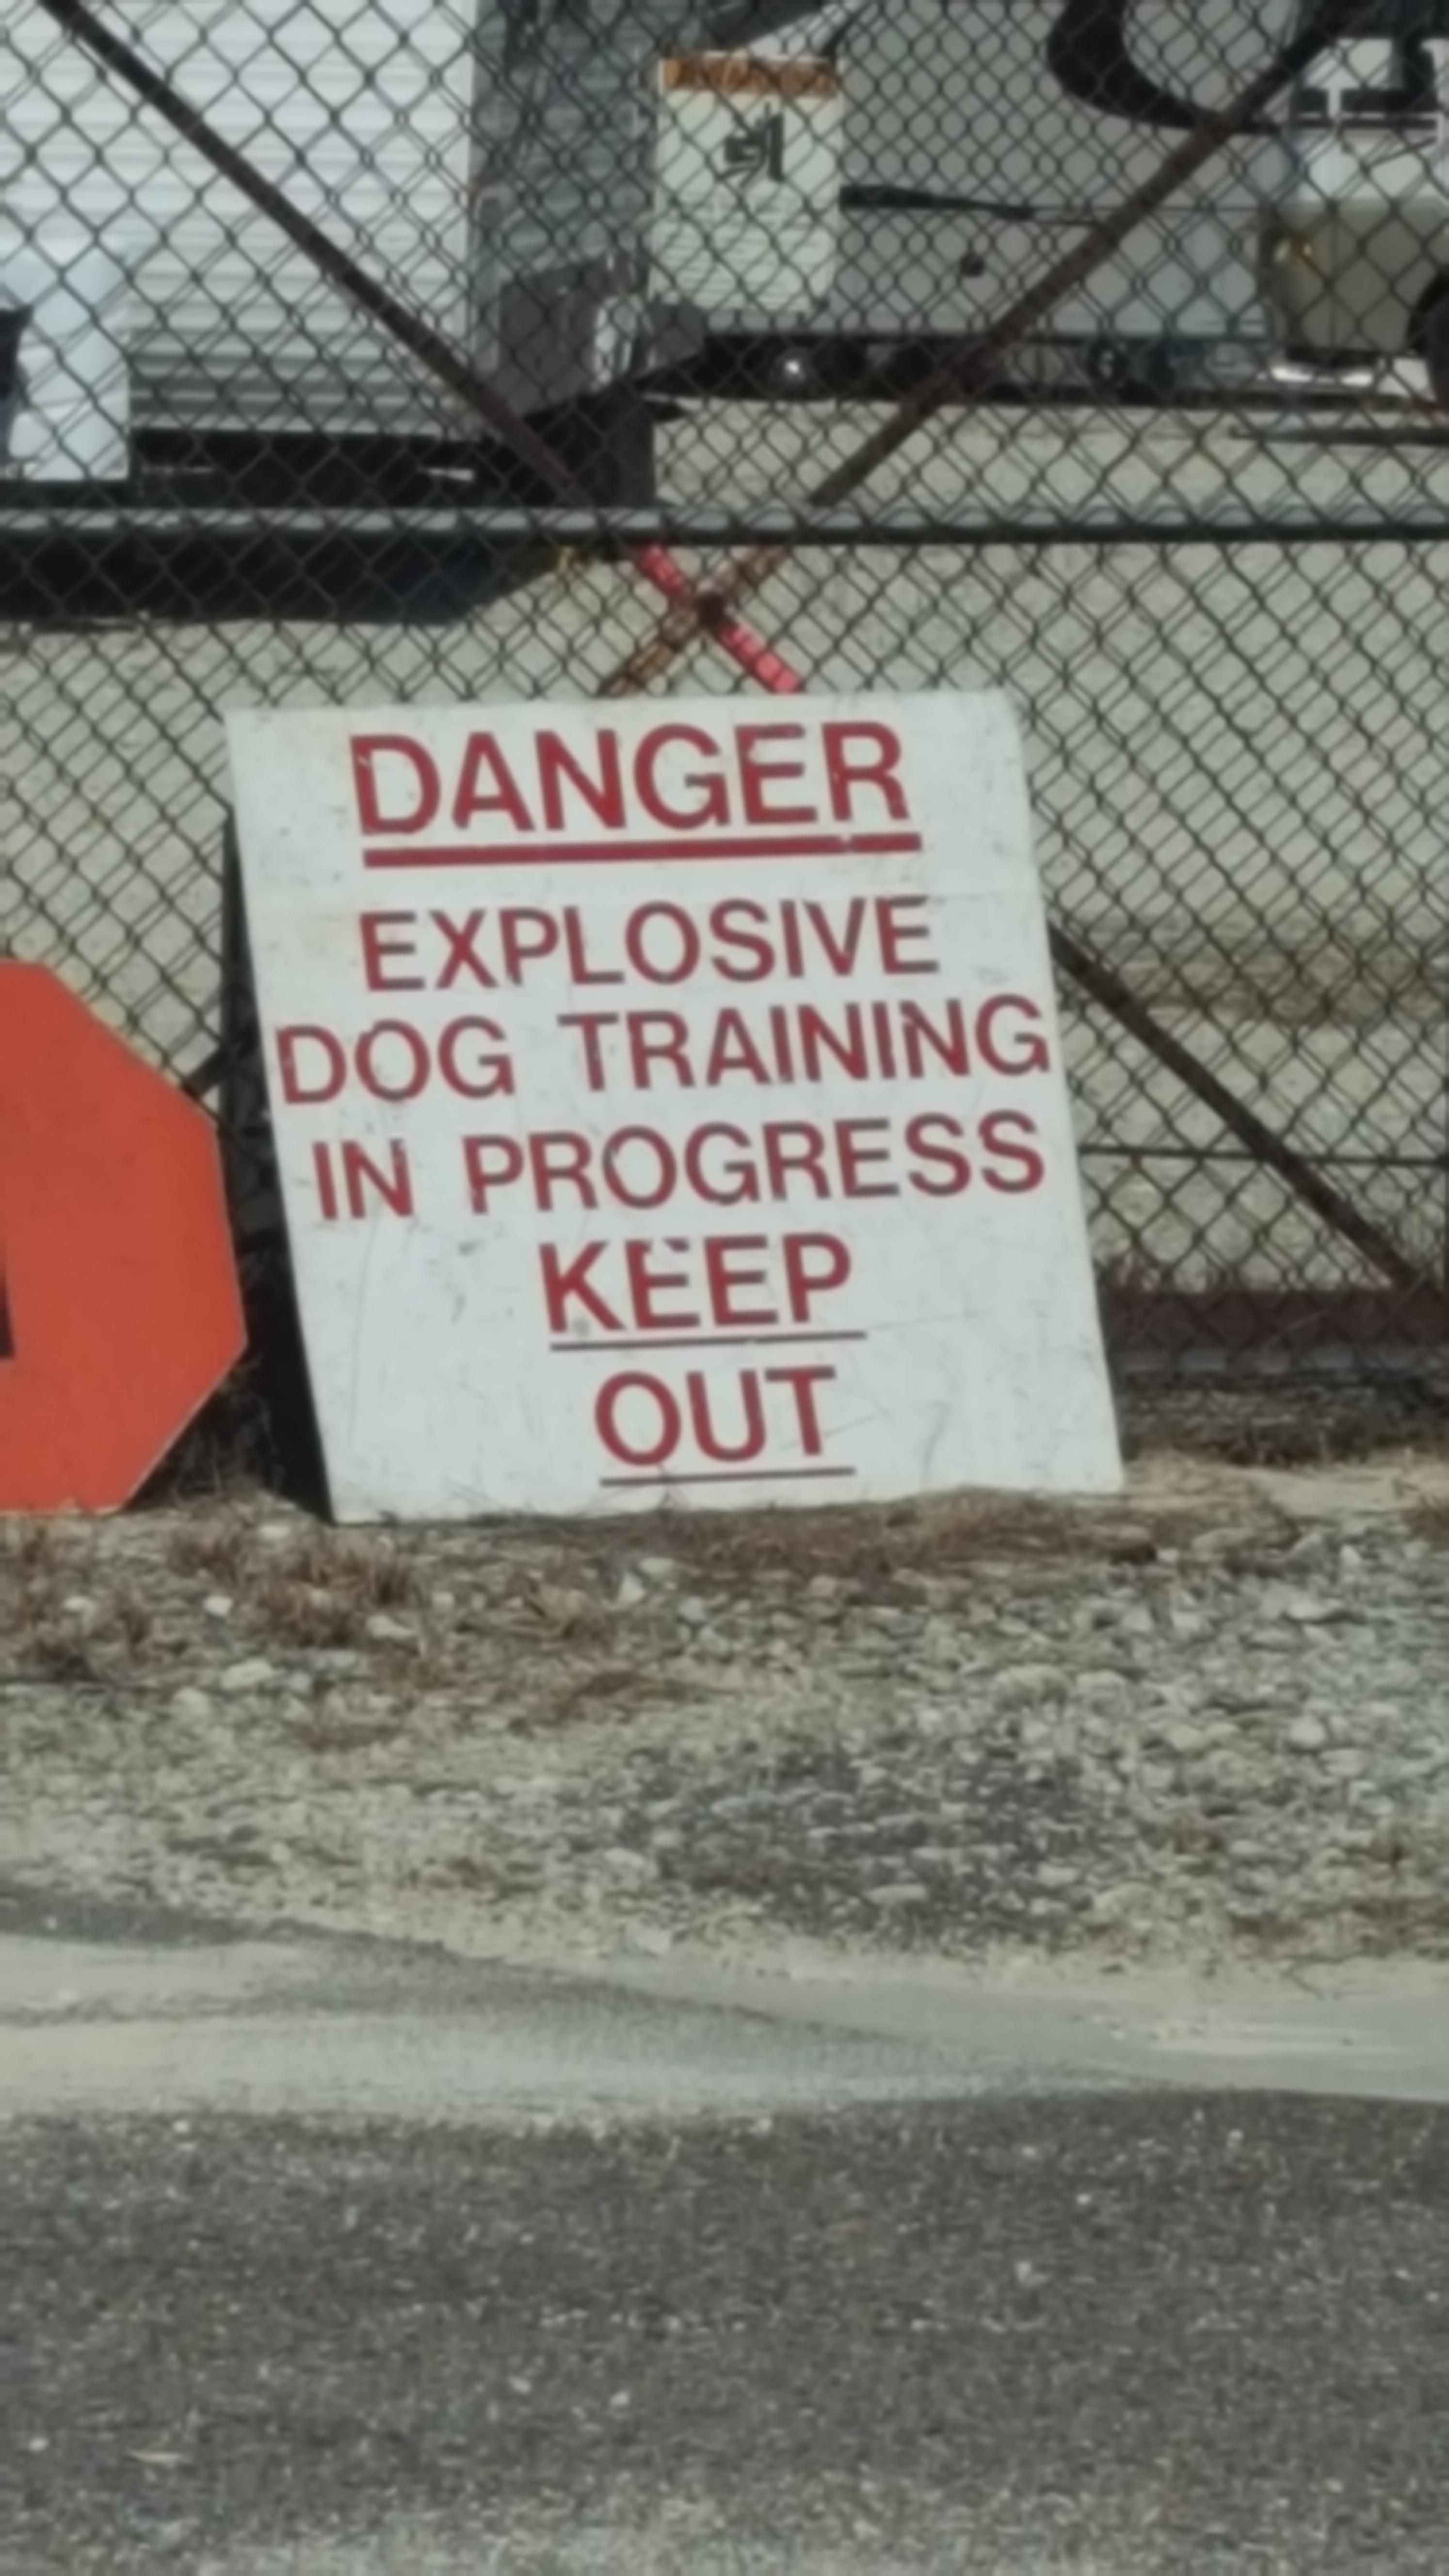 I didn't know they exploded dogs...